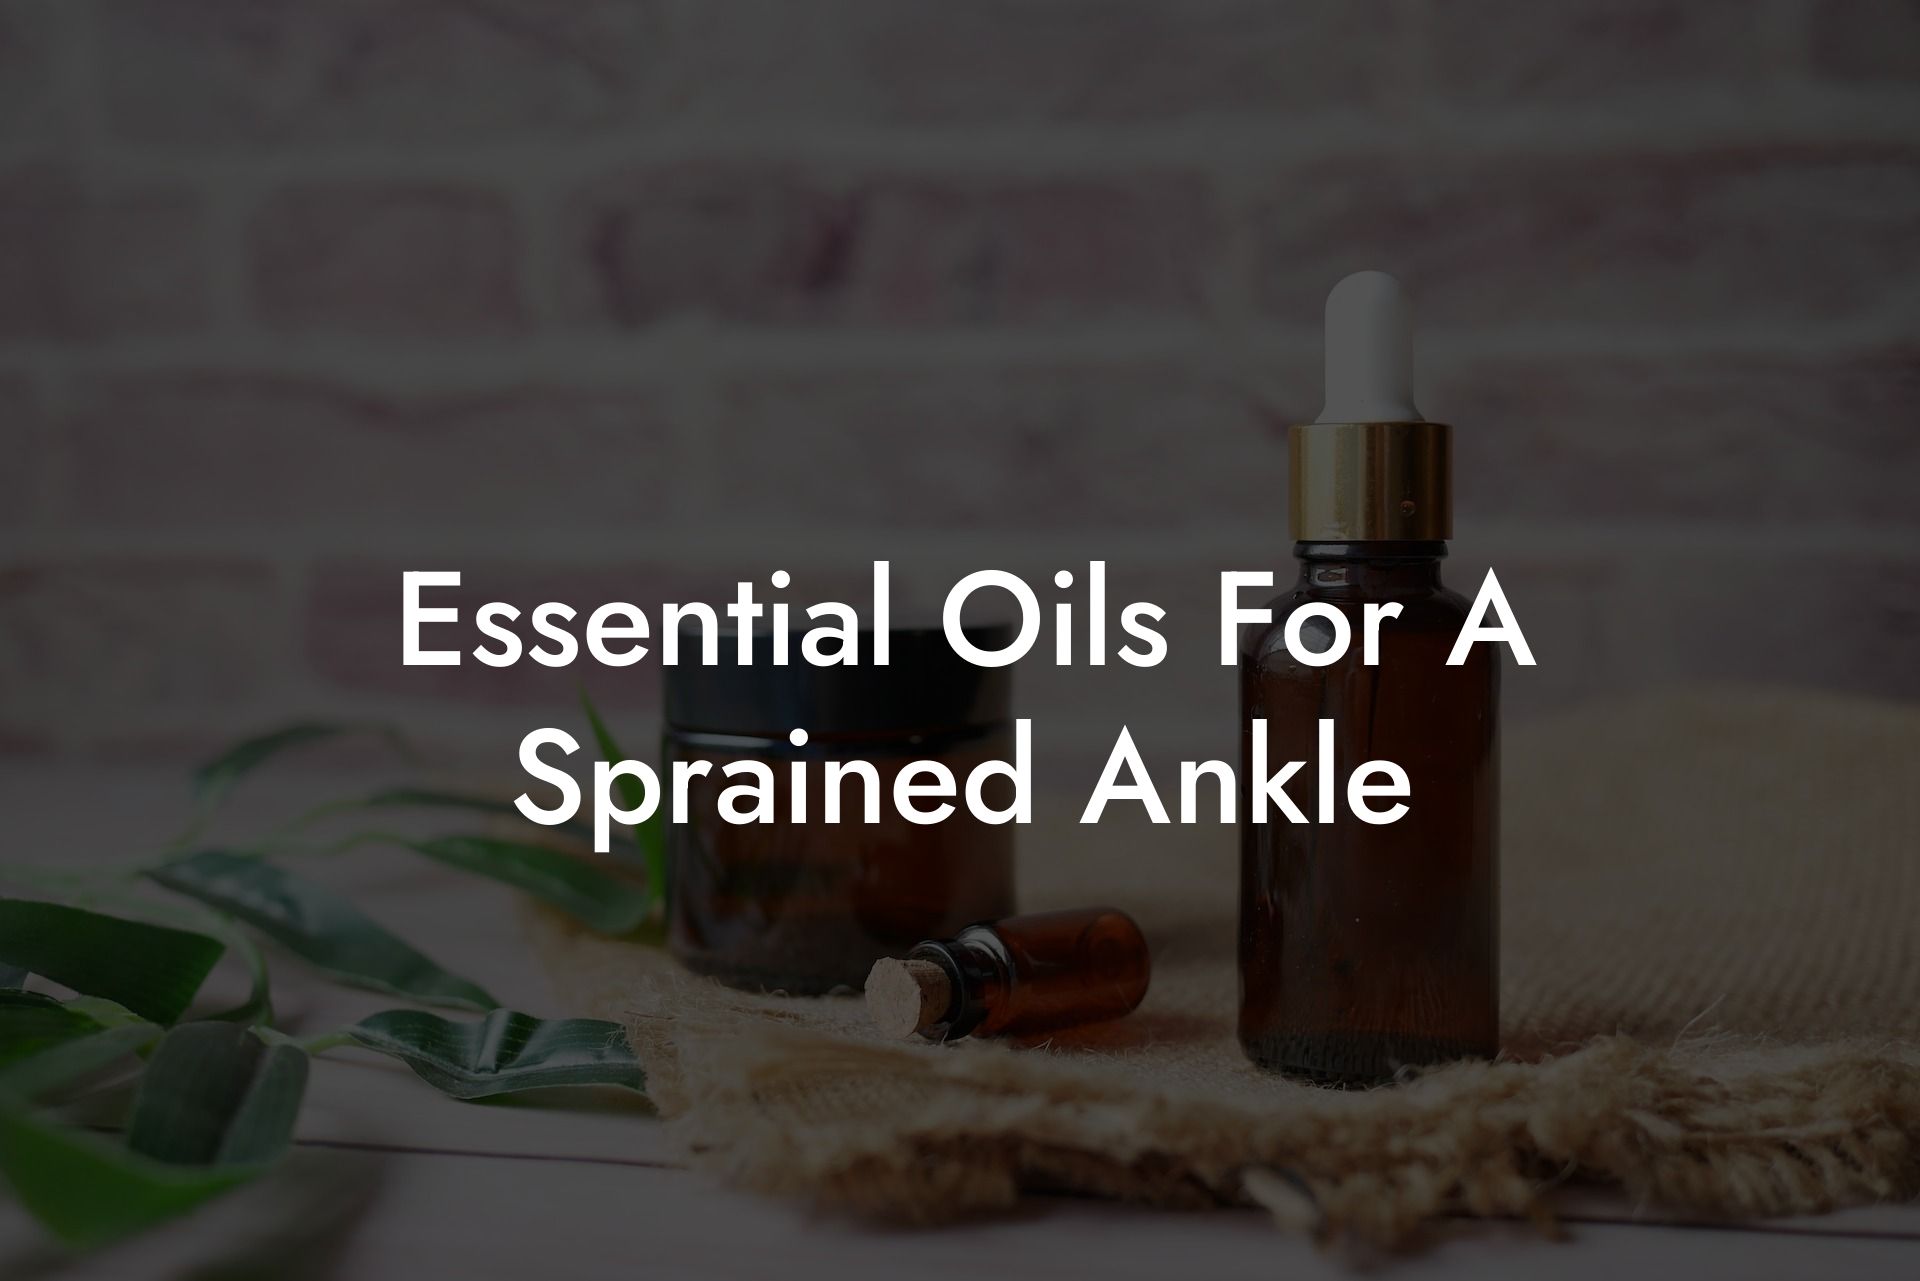 Essential Oils For A Sprained Ankle